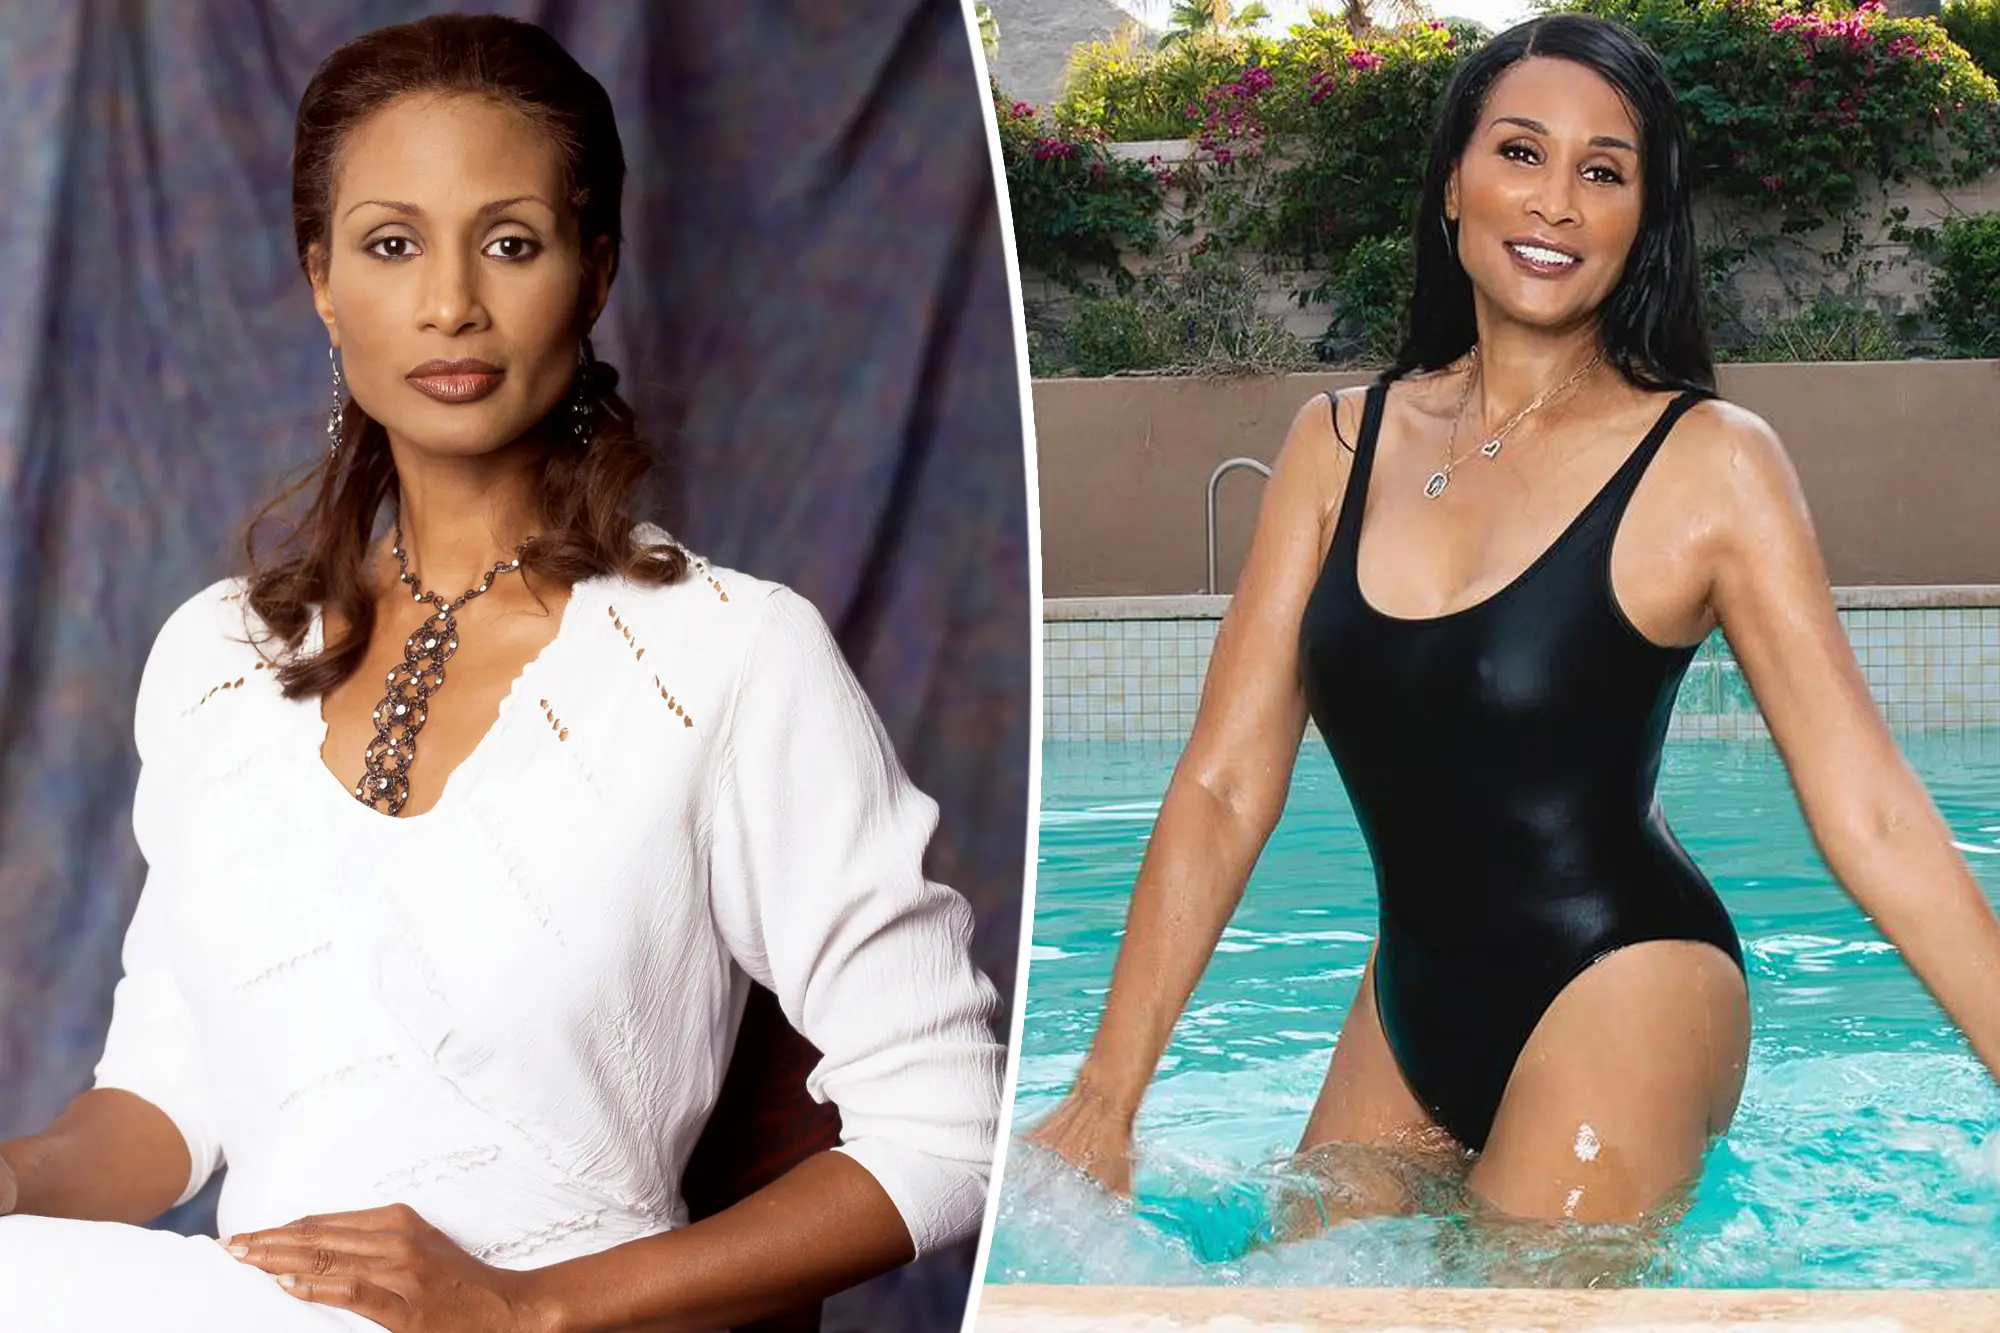 beverly-johnson-reveals-shocking-incident-at-hotel-pool